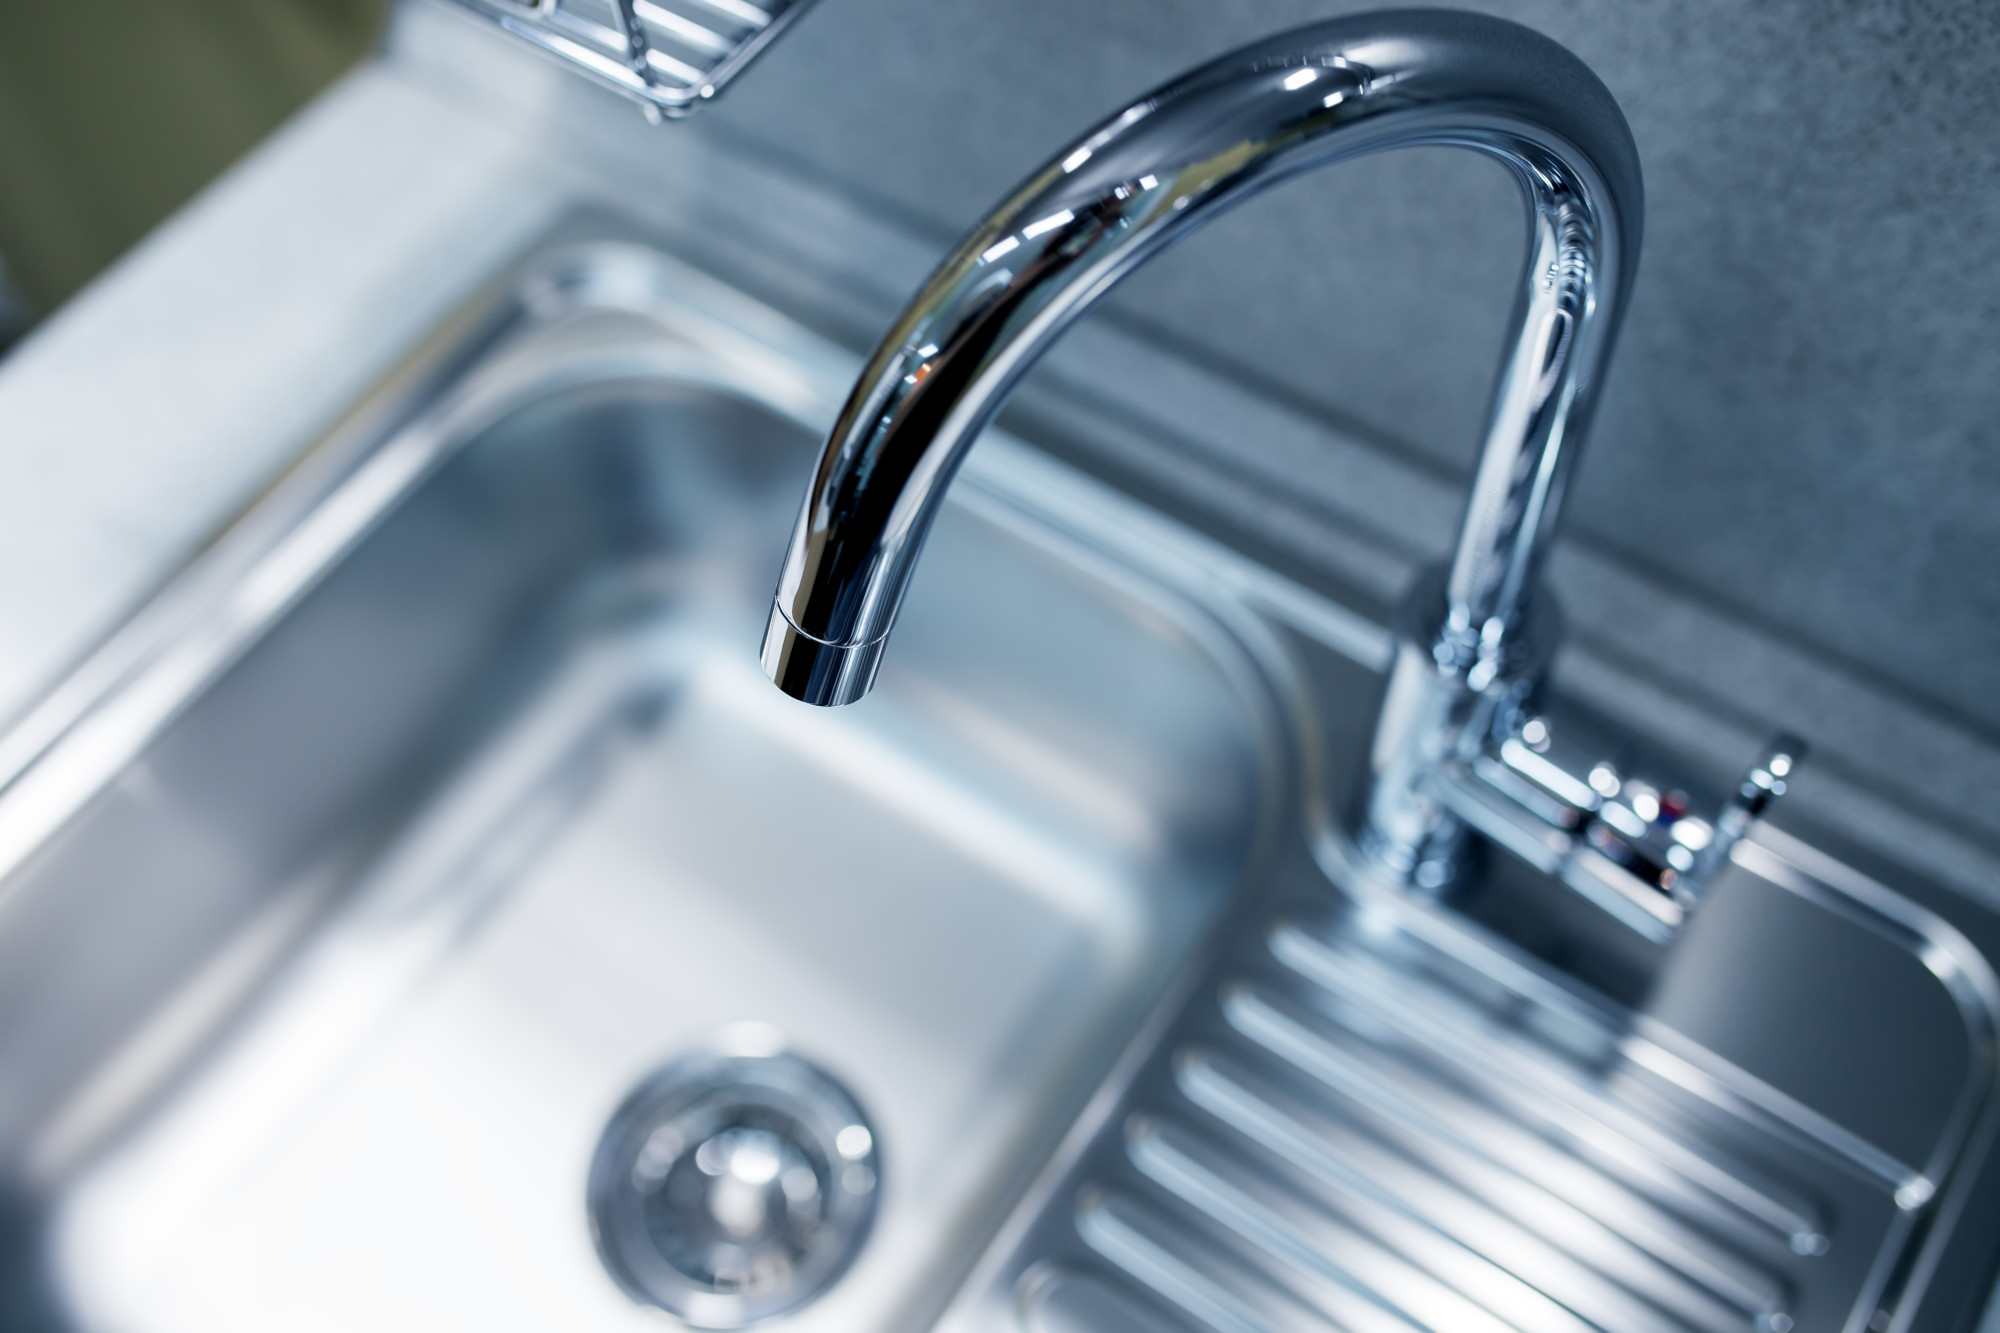 Kitchen sink leaks can lead to serious issues if left unaddressed. Learn about 3 common causes of kitchen sink leaks with tips on how to fix them fast.